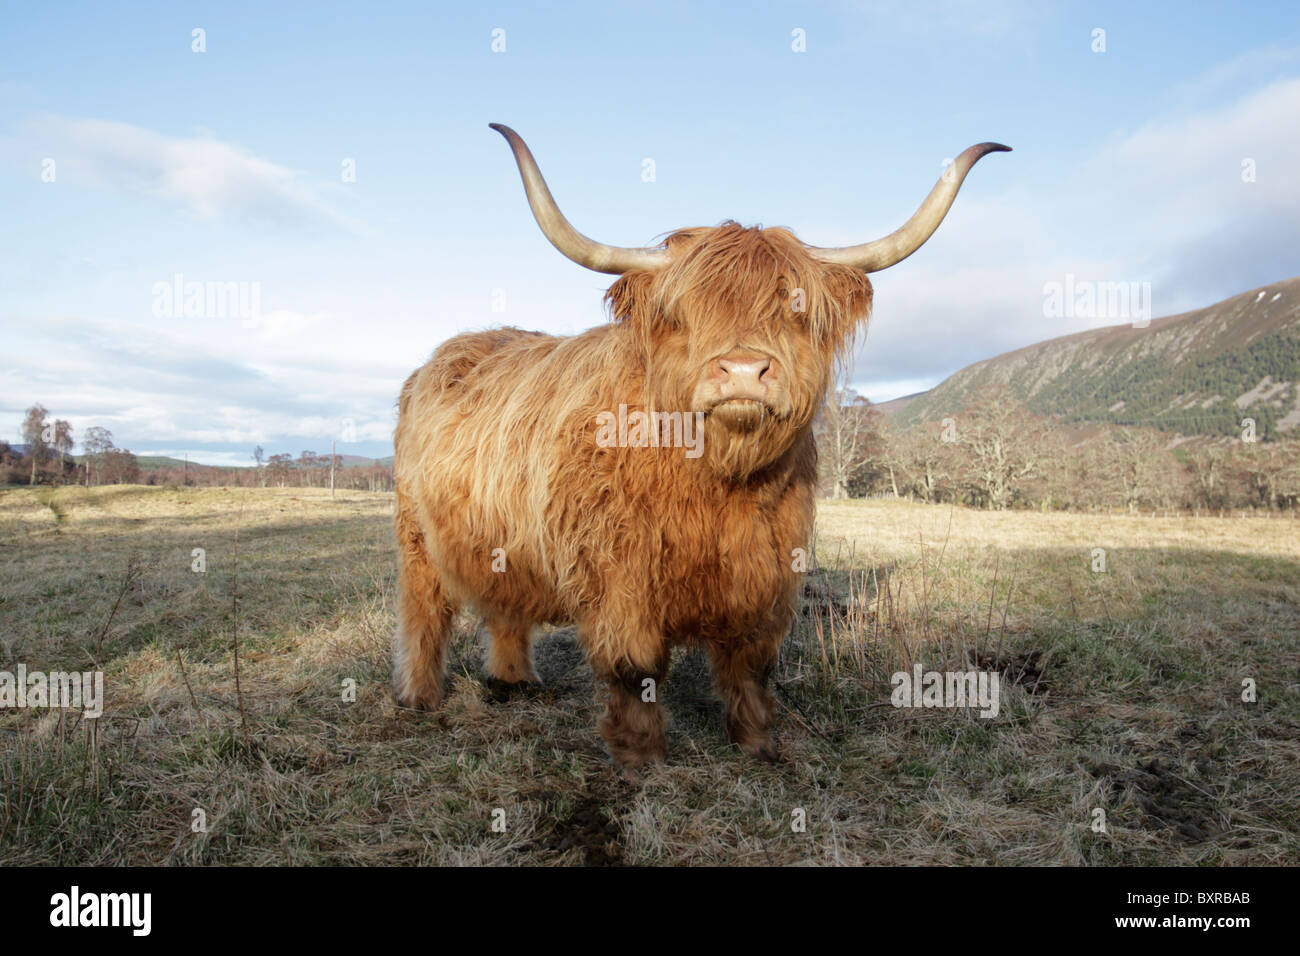 Highland cattle standing among rough grasses Stock Photo